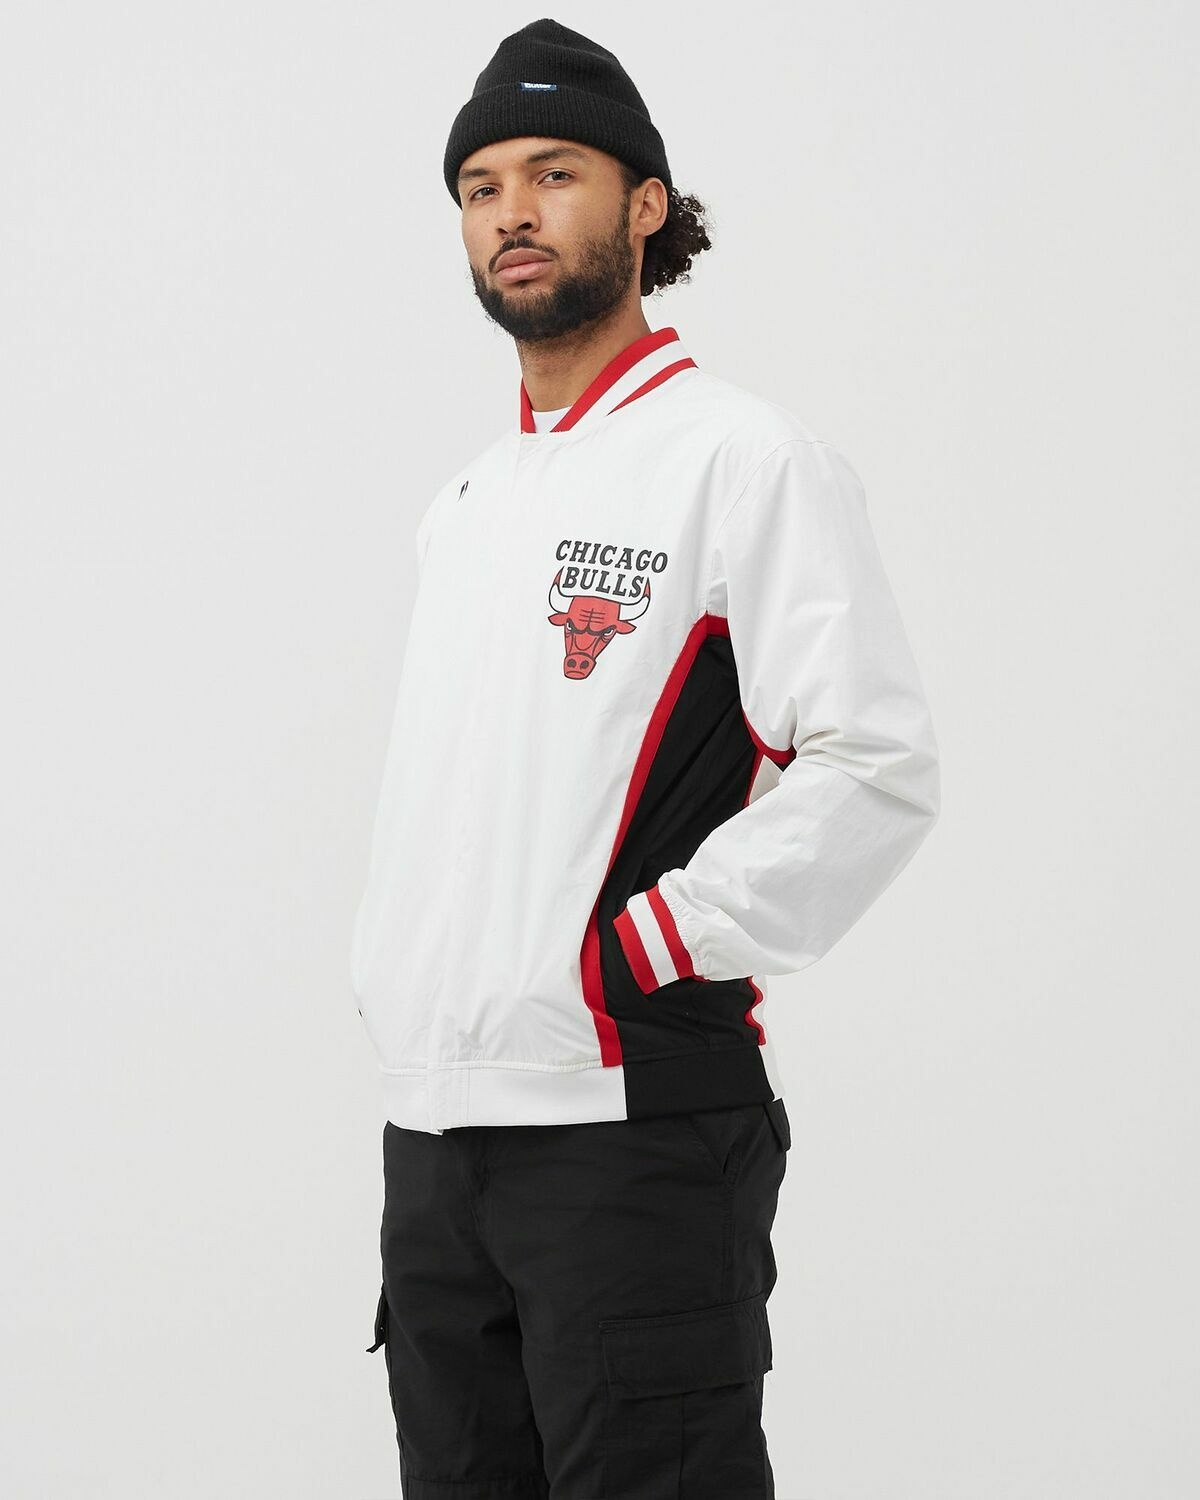 Mitchell & Ness Nba Authentic Warm Up Jacket Chicago Bulls 1992 93 White - Mens - College Jackets/Track Jackets